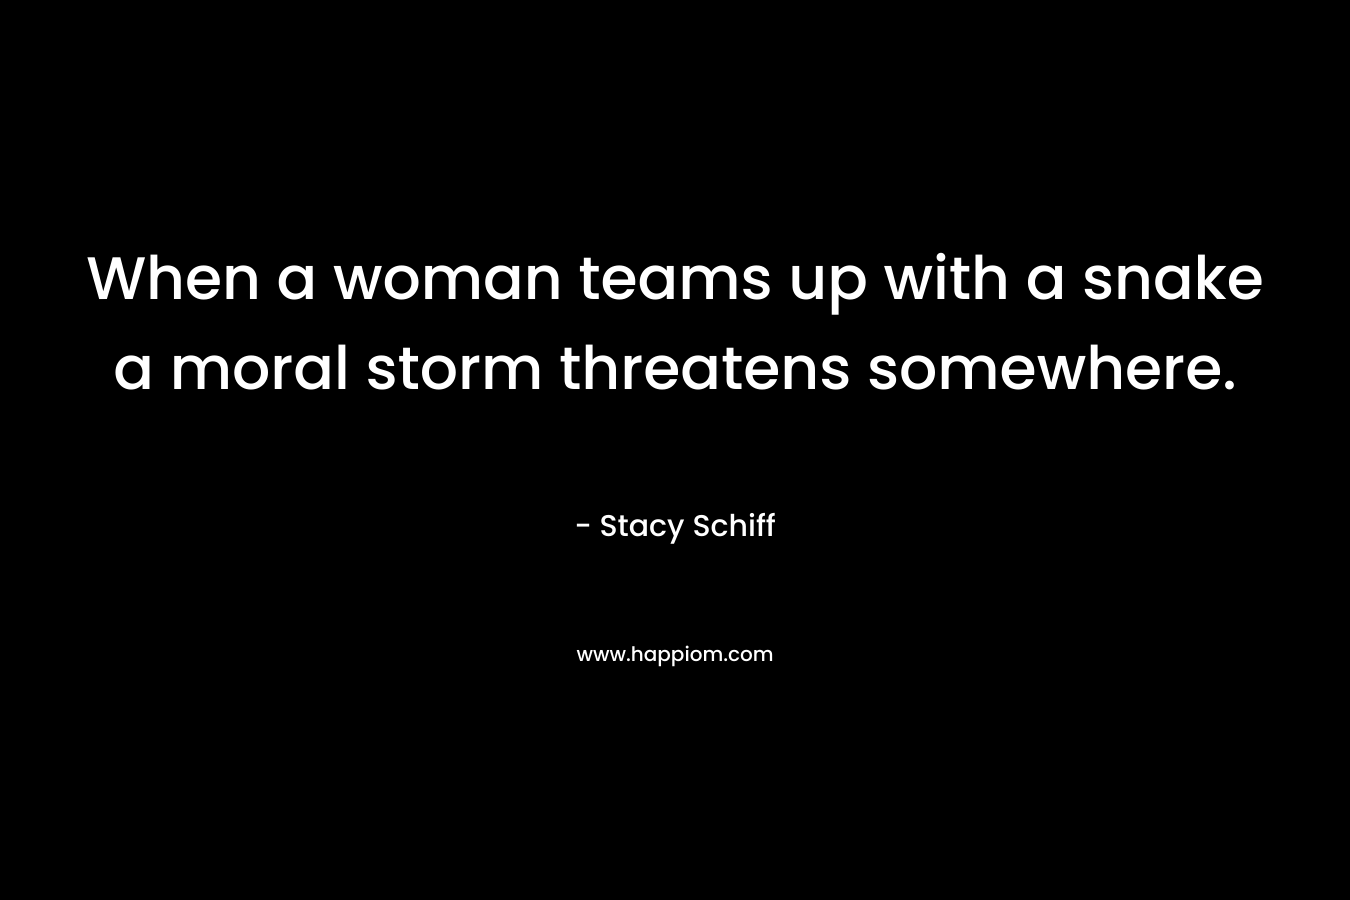 When a woman teams up with a snake a moral storm threatens somewhere. – Stacy Schiff